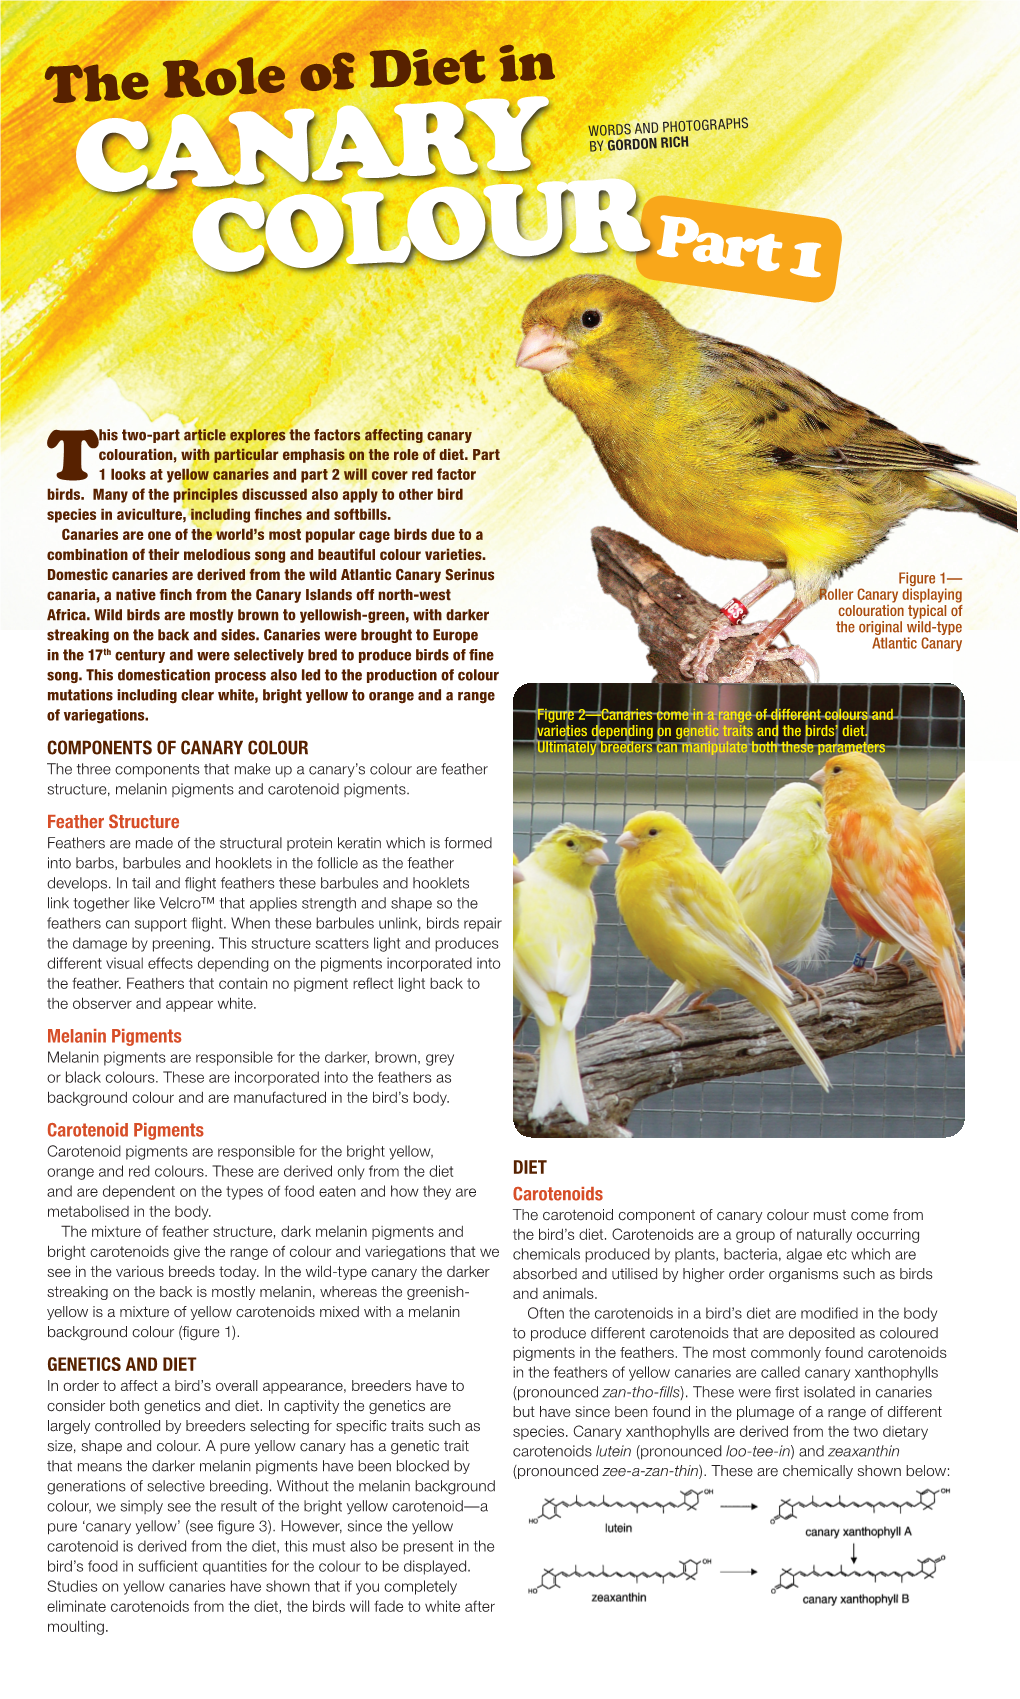 Canary Colouration, with Particular Emphasis on the Role of Diet